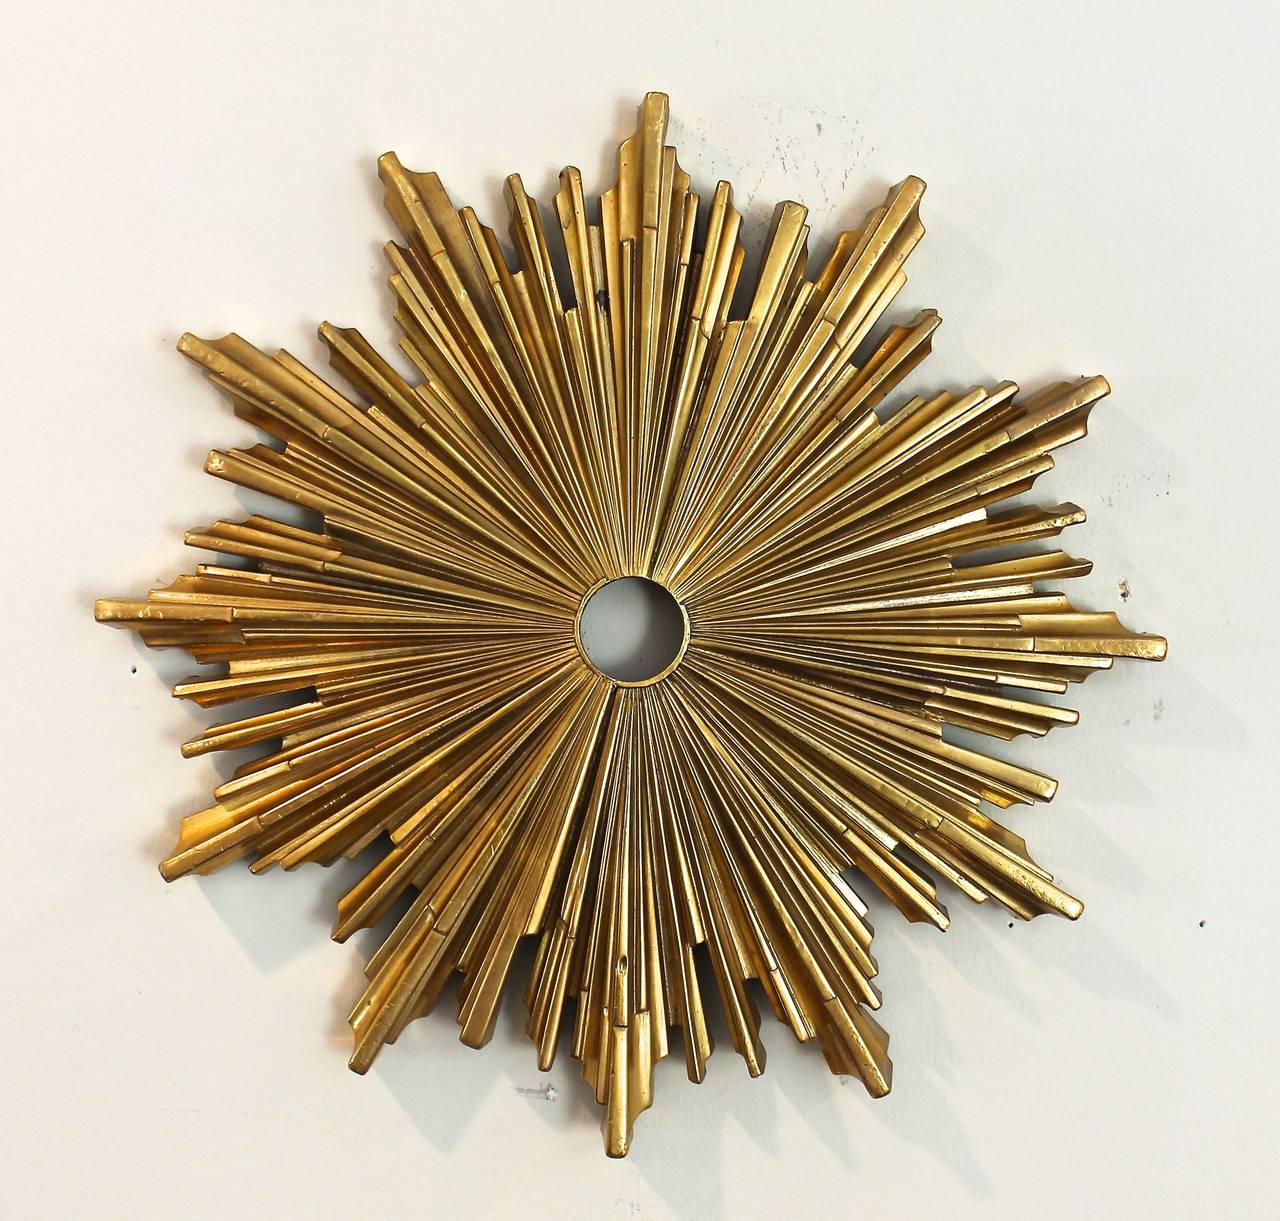 D'ore bronze sunburst or starburst ceiling mount for chandelier, or can be modified for use as flush mount ceiling light fixture as shown in photos. Made by E.F. Caldwell and stamped on reverse 